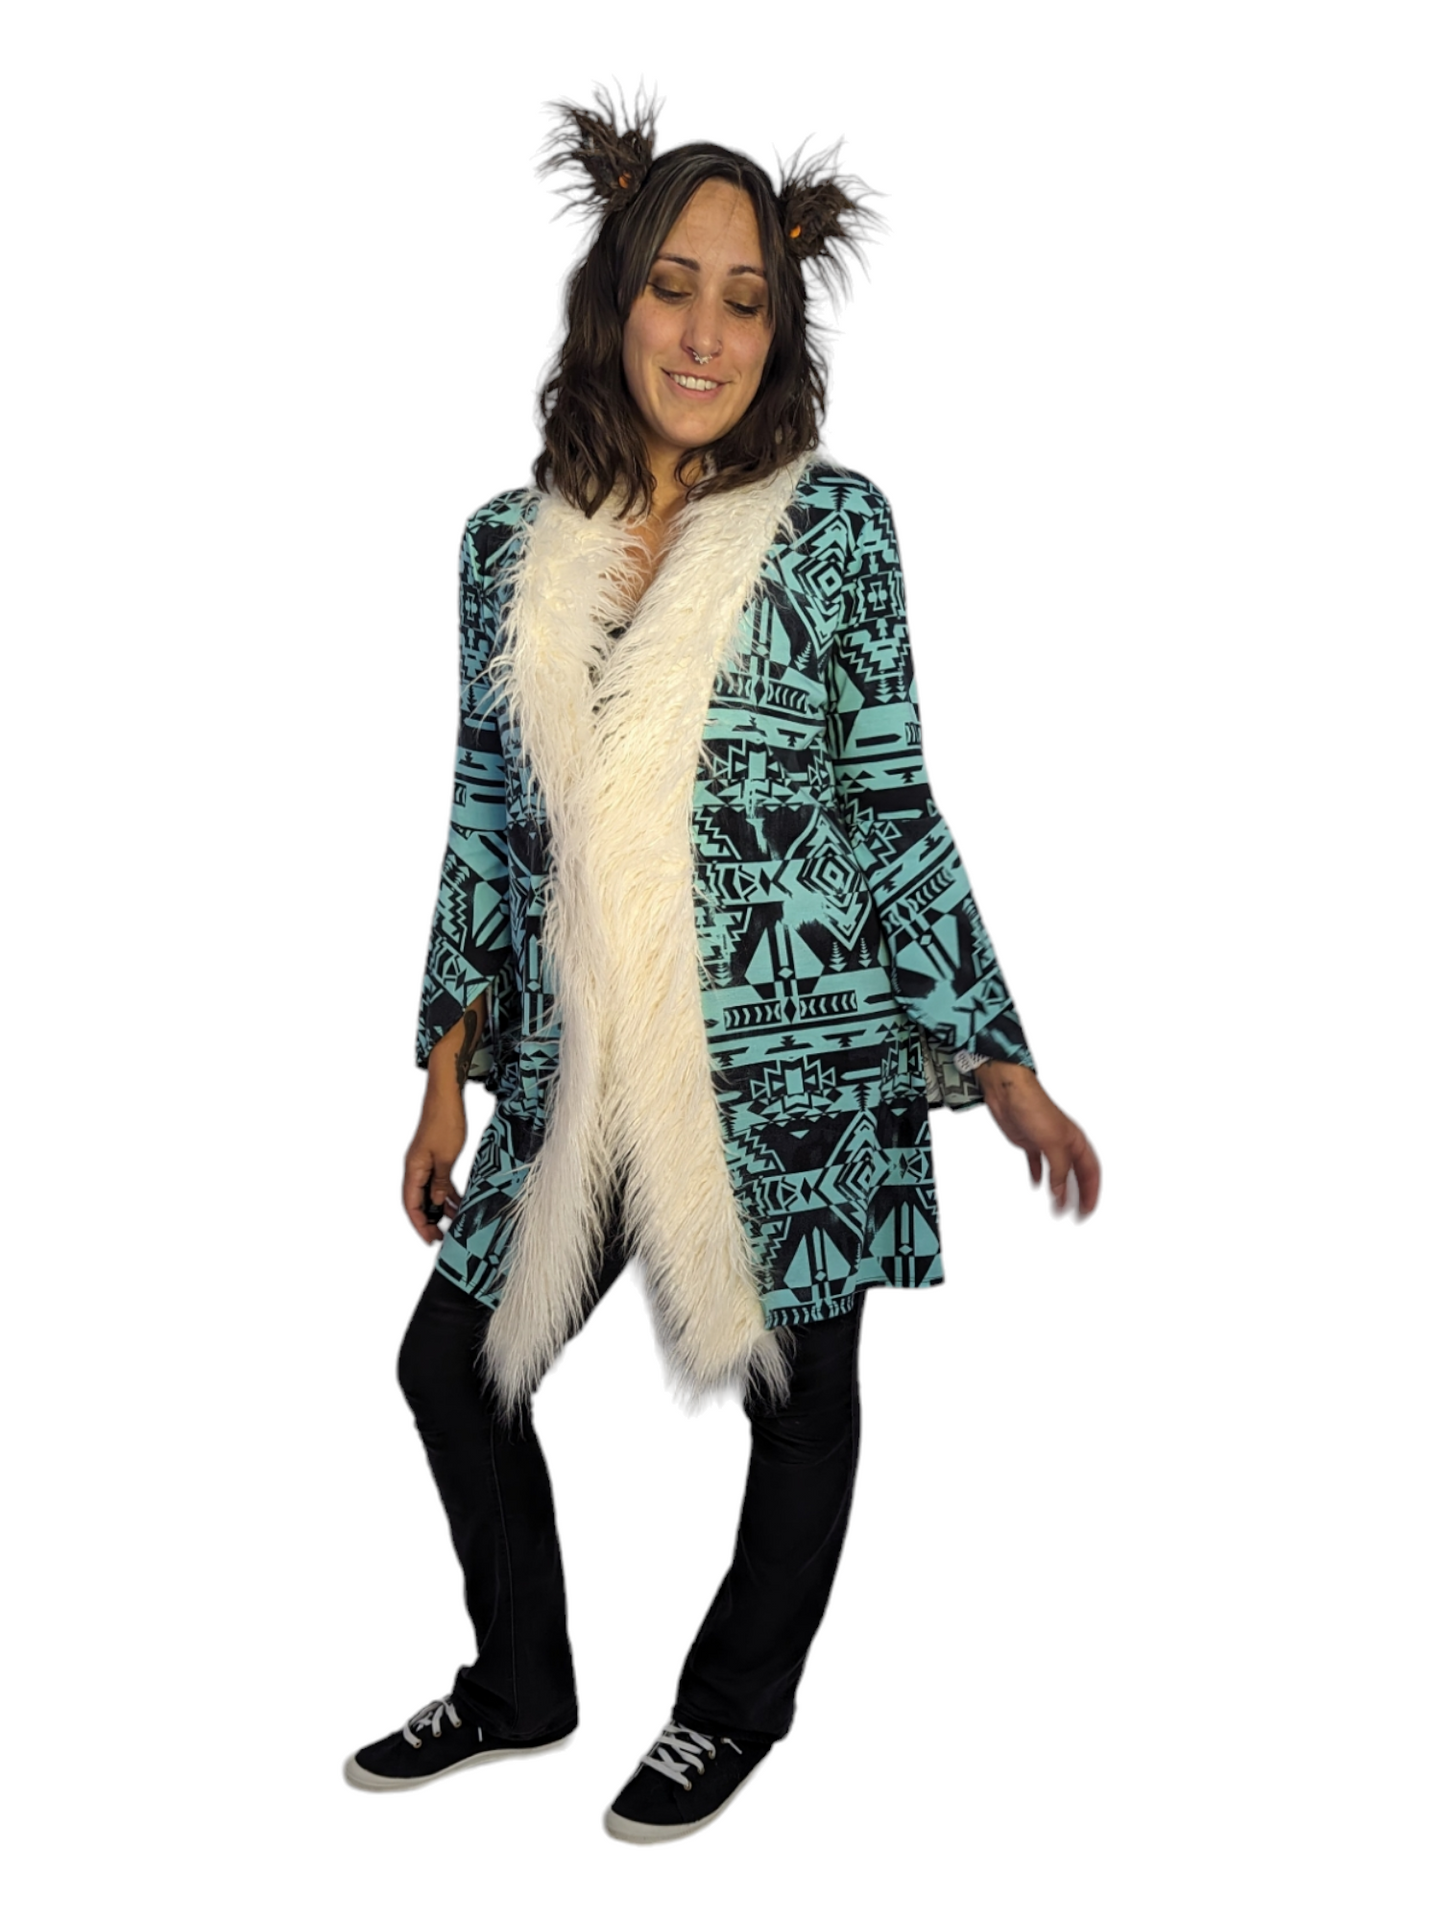 Front view of woman wearing penny lane coat.